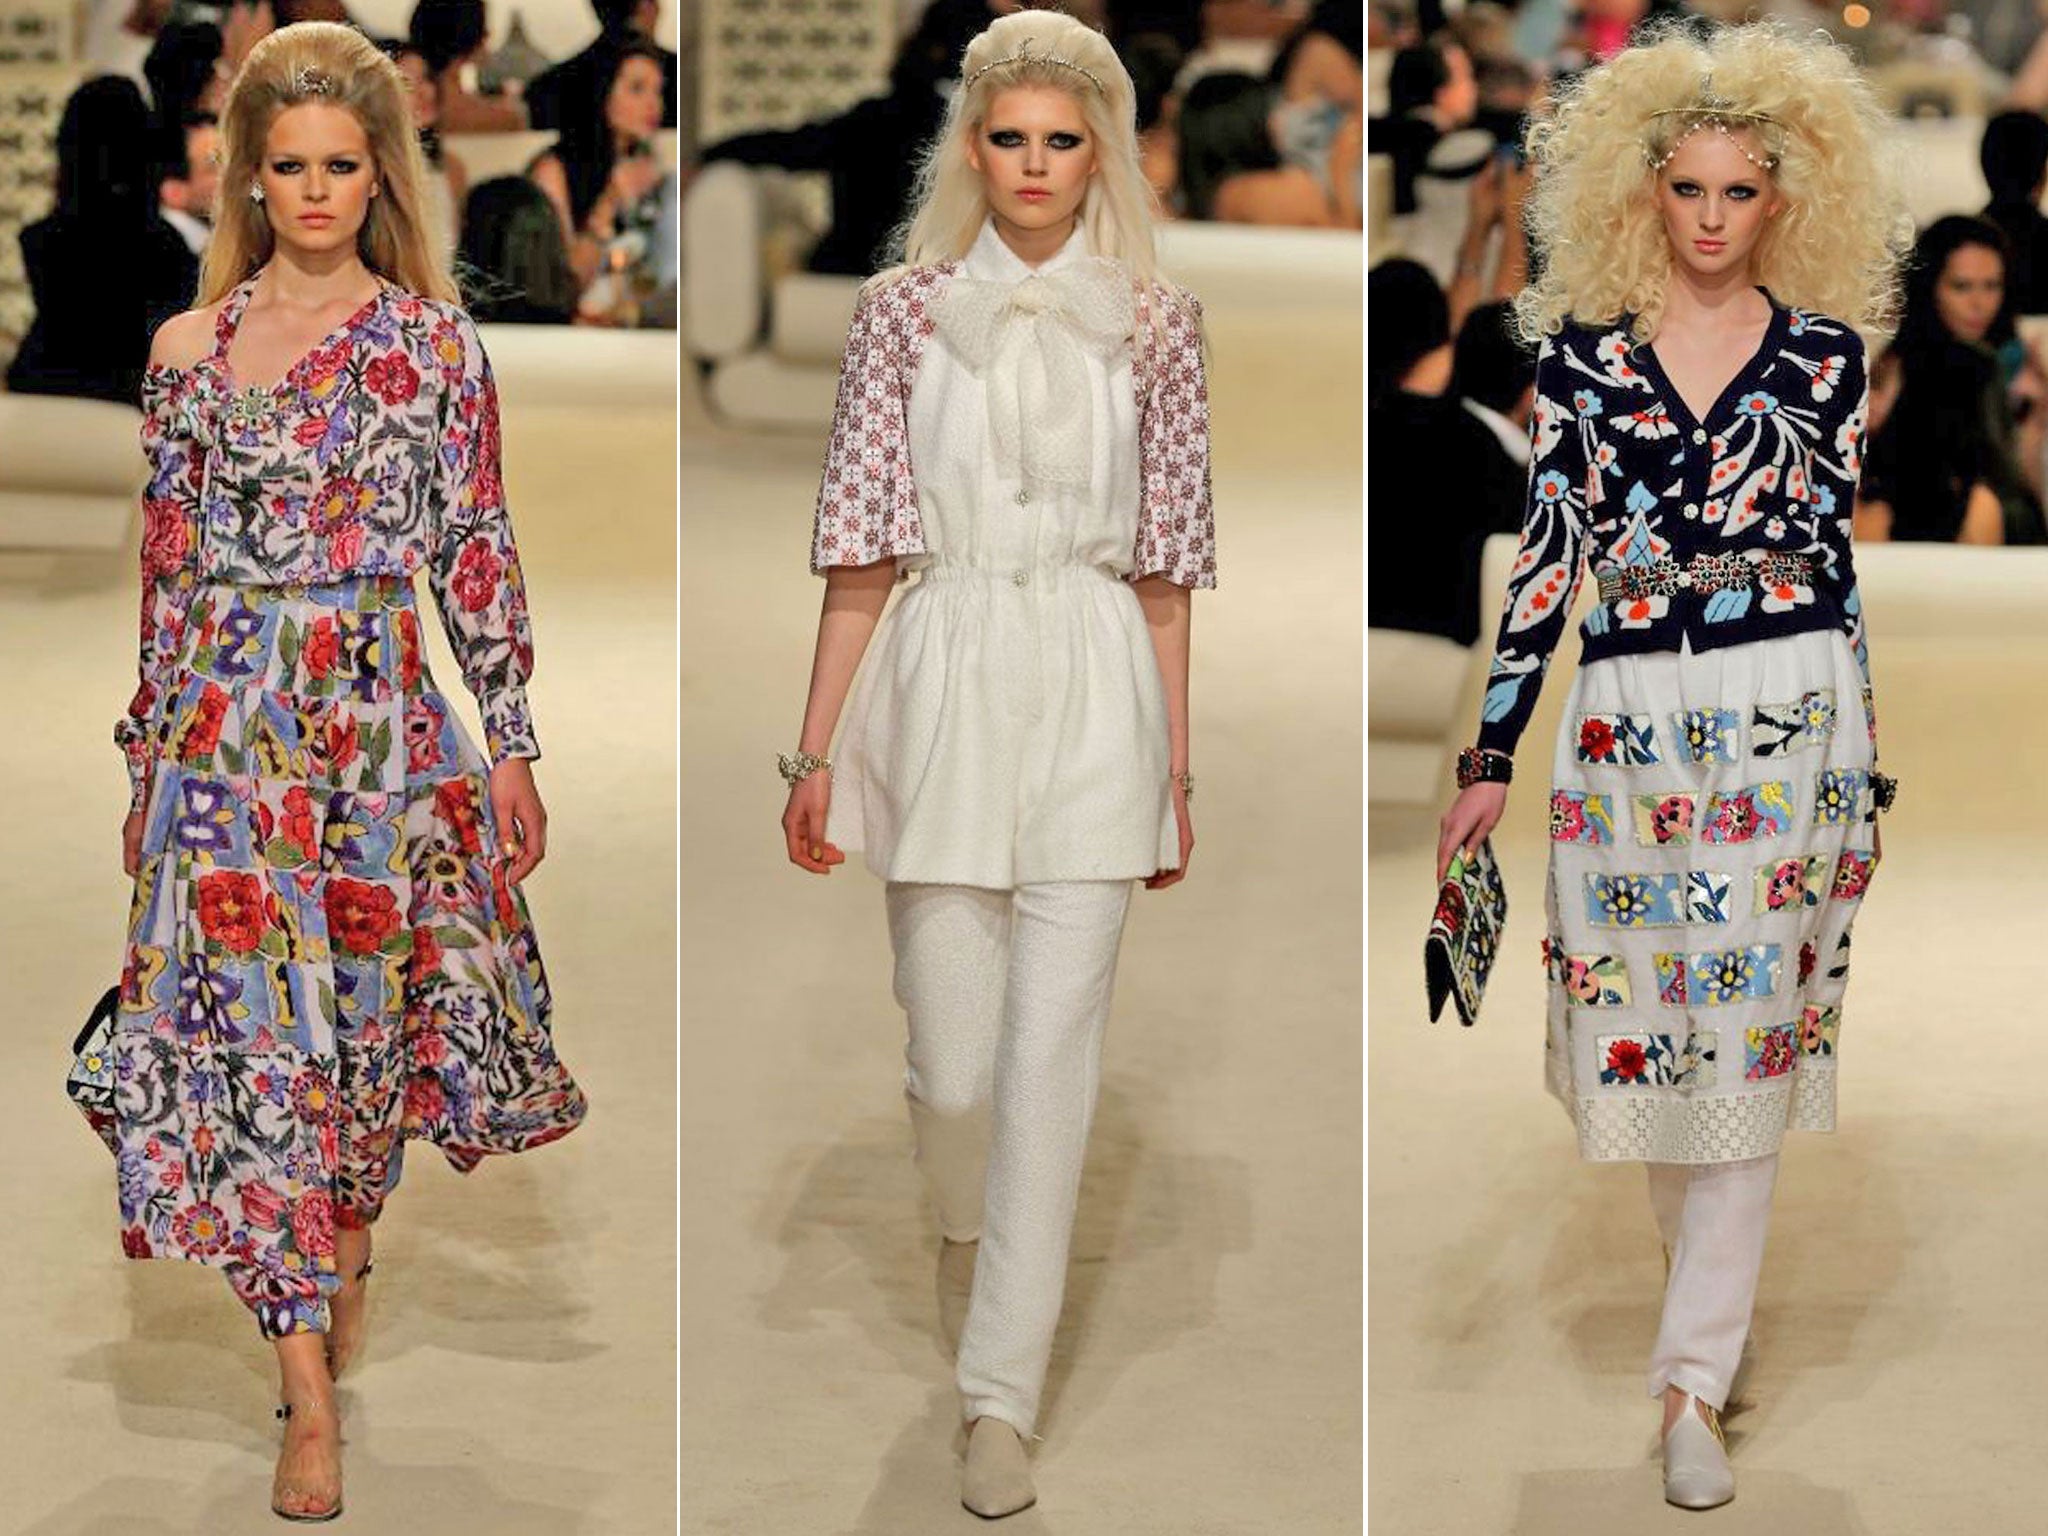 Karl Lagerfeld's Chanel Cruise show in Dubai presents his pre-spring/summer 2015  collection, The Independent